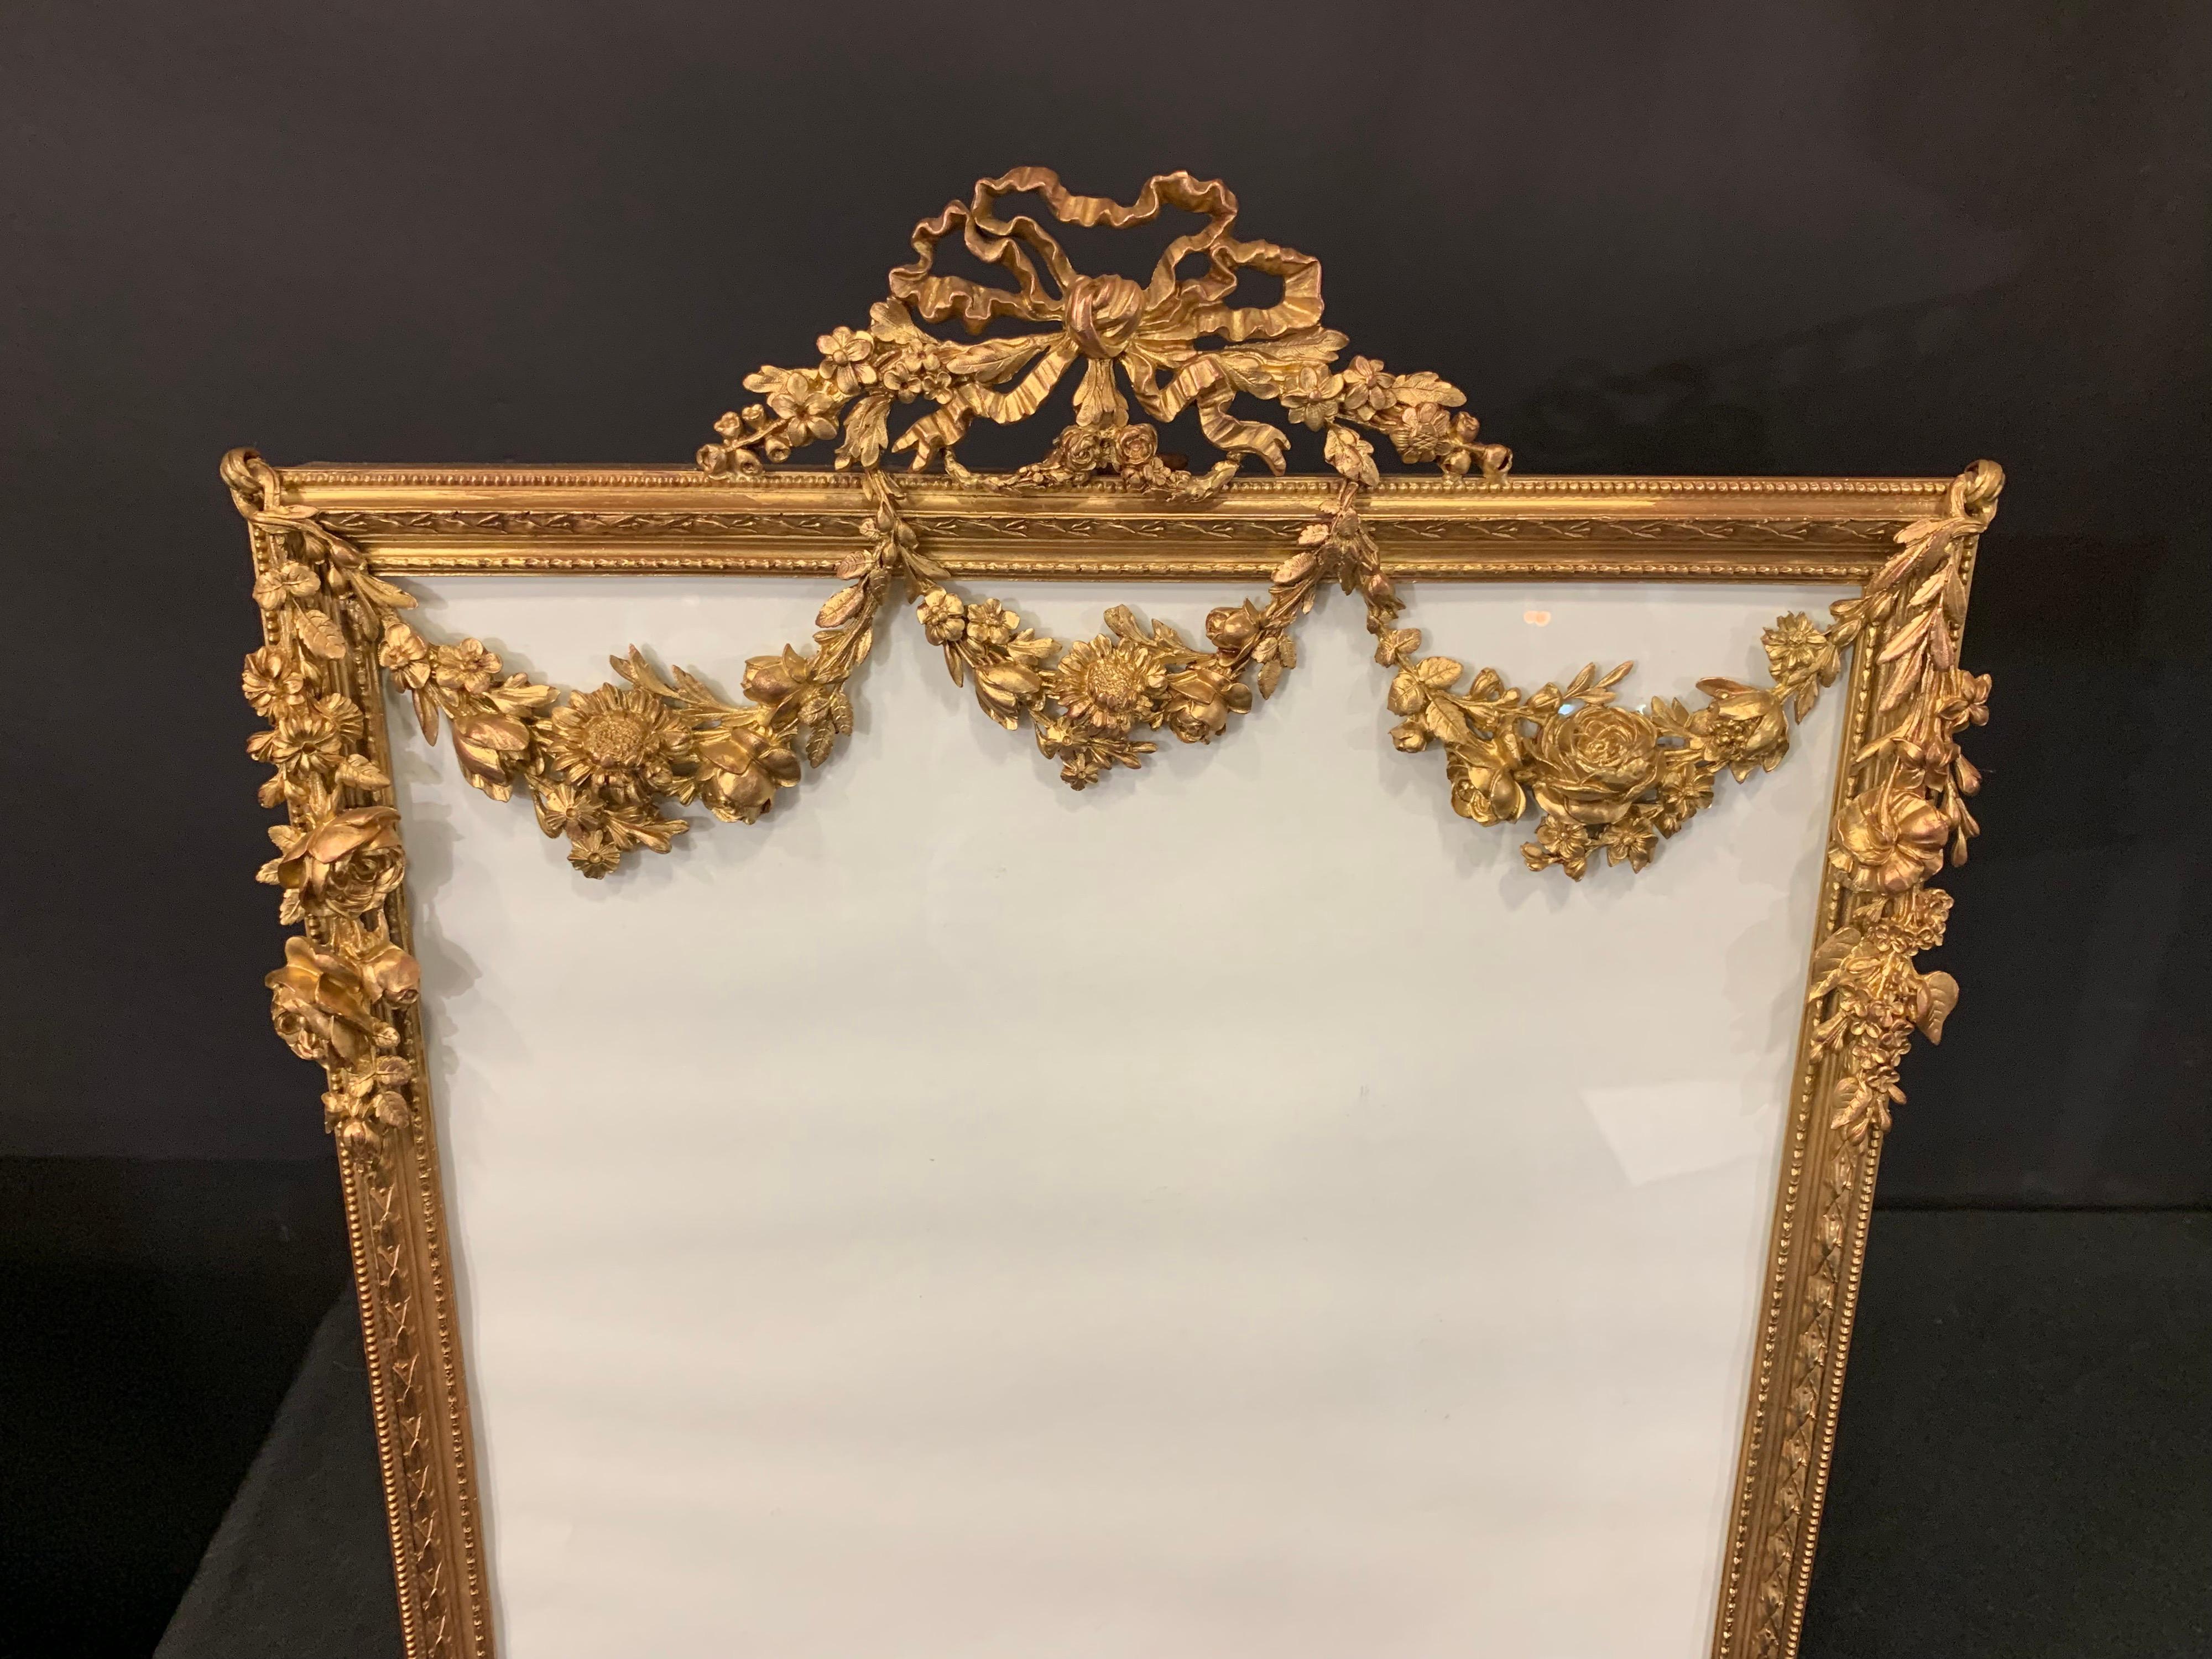 A wonderful French large bronze ormolu-mounted bow top garland swag picture frame with bronze easel back
Measures: 17